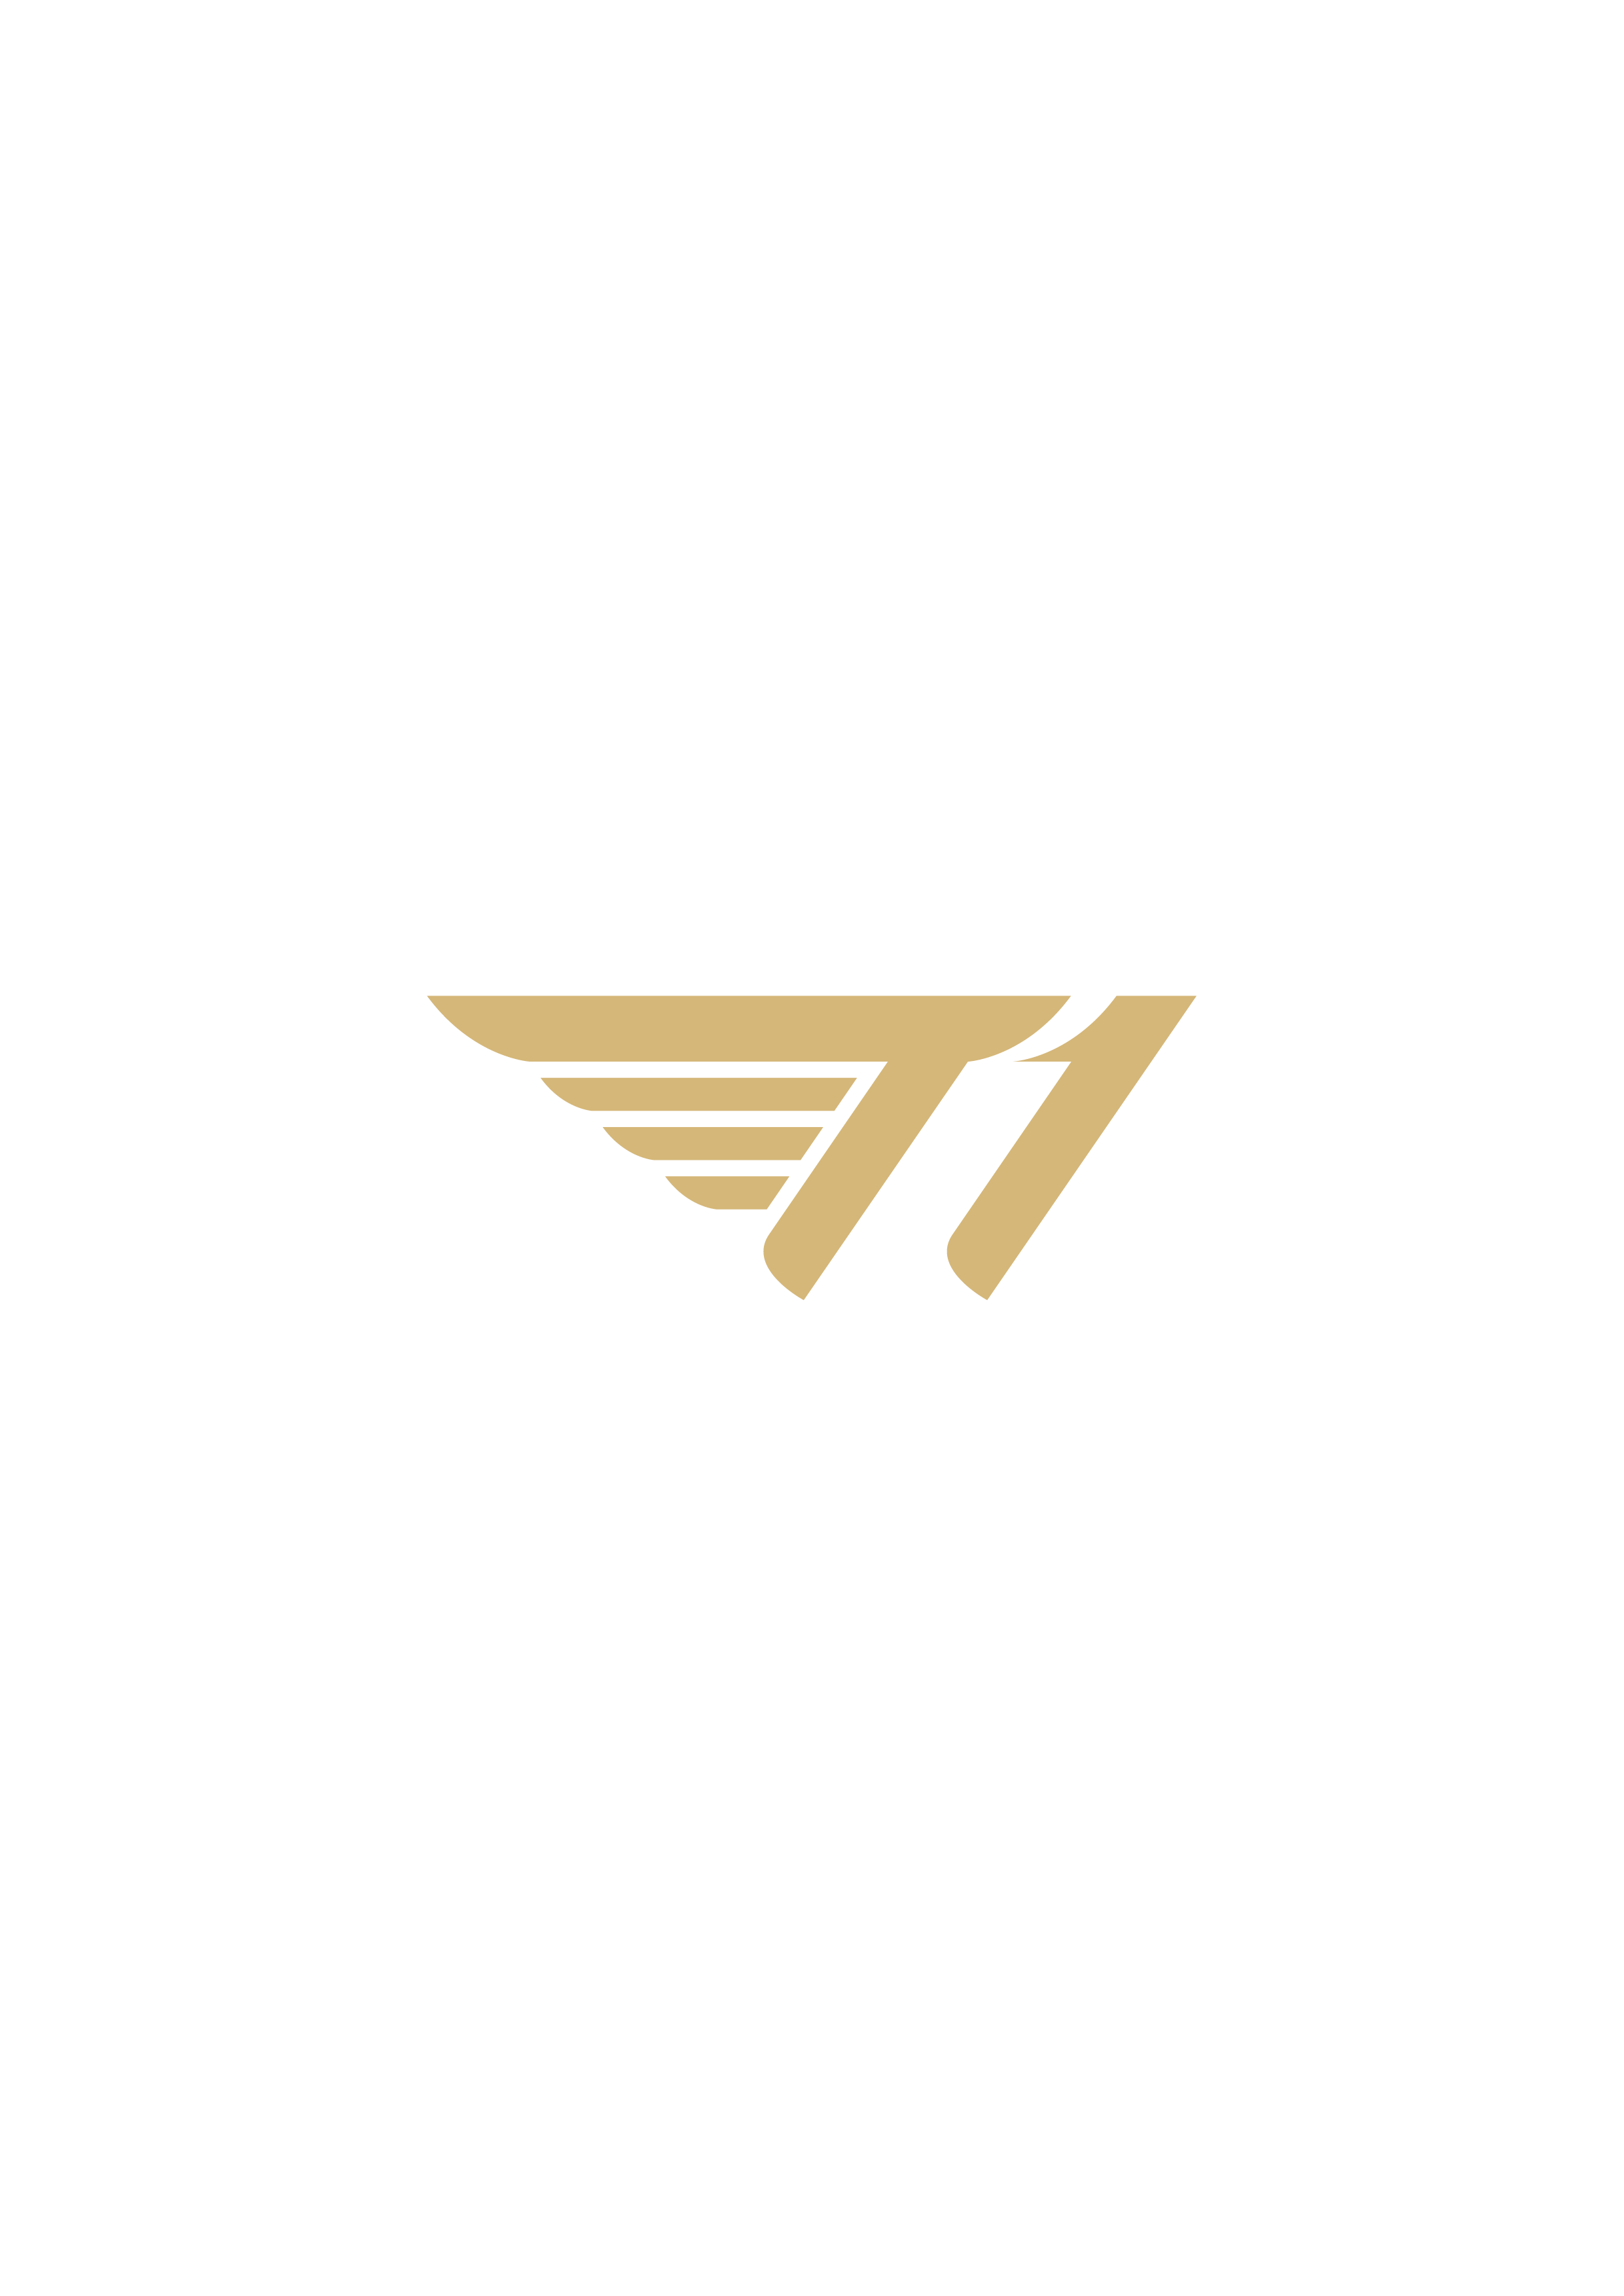 T1 LOGO GOLD.png